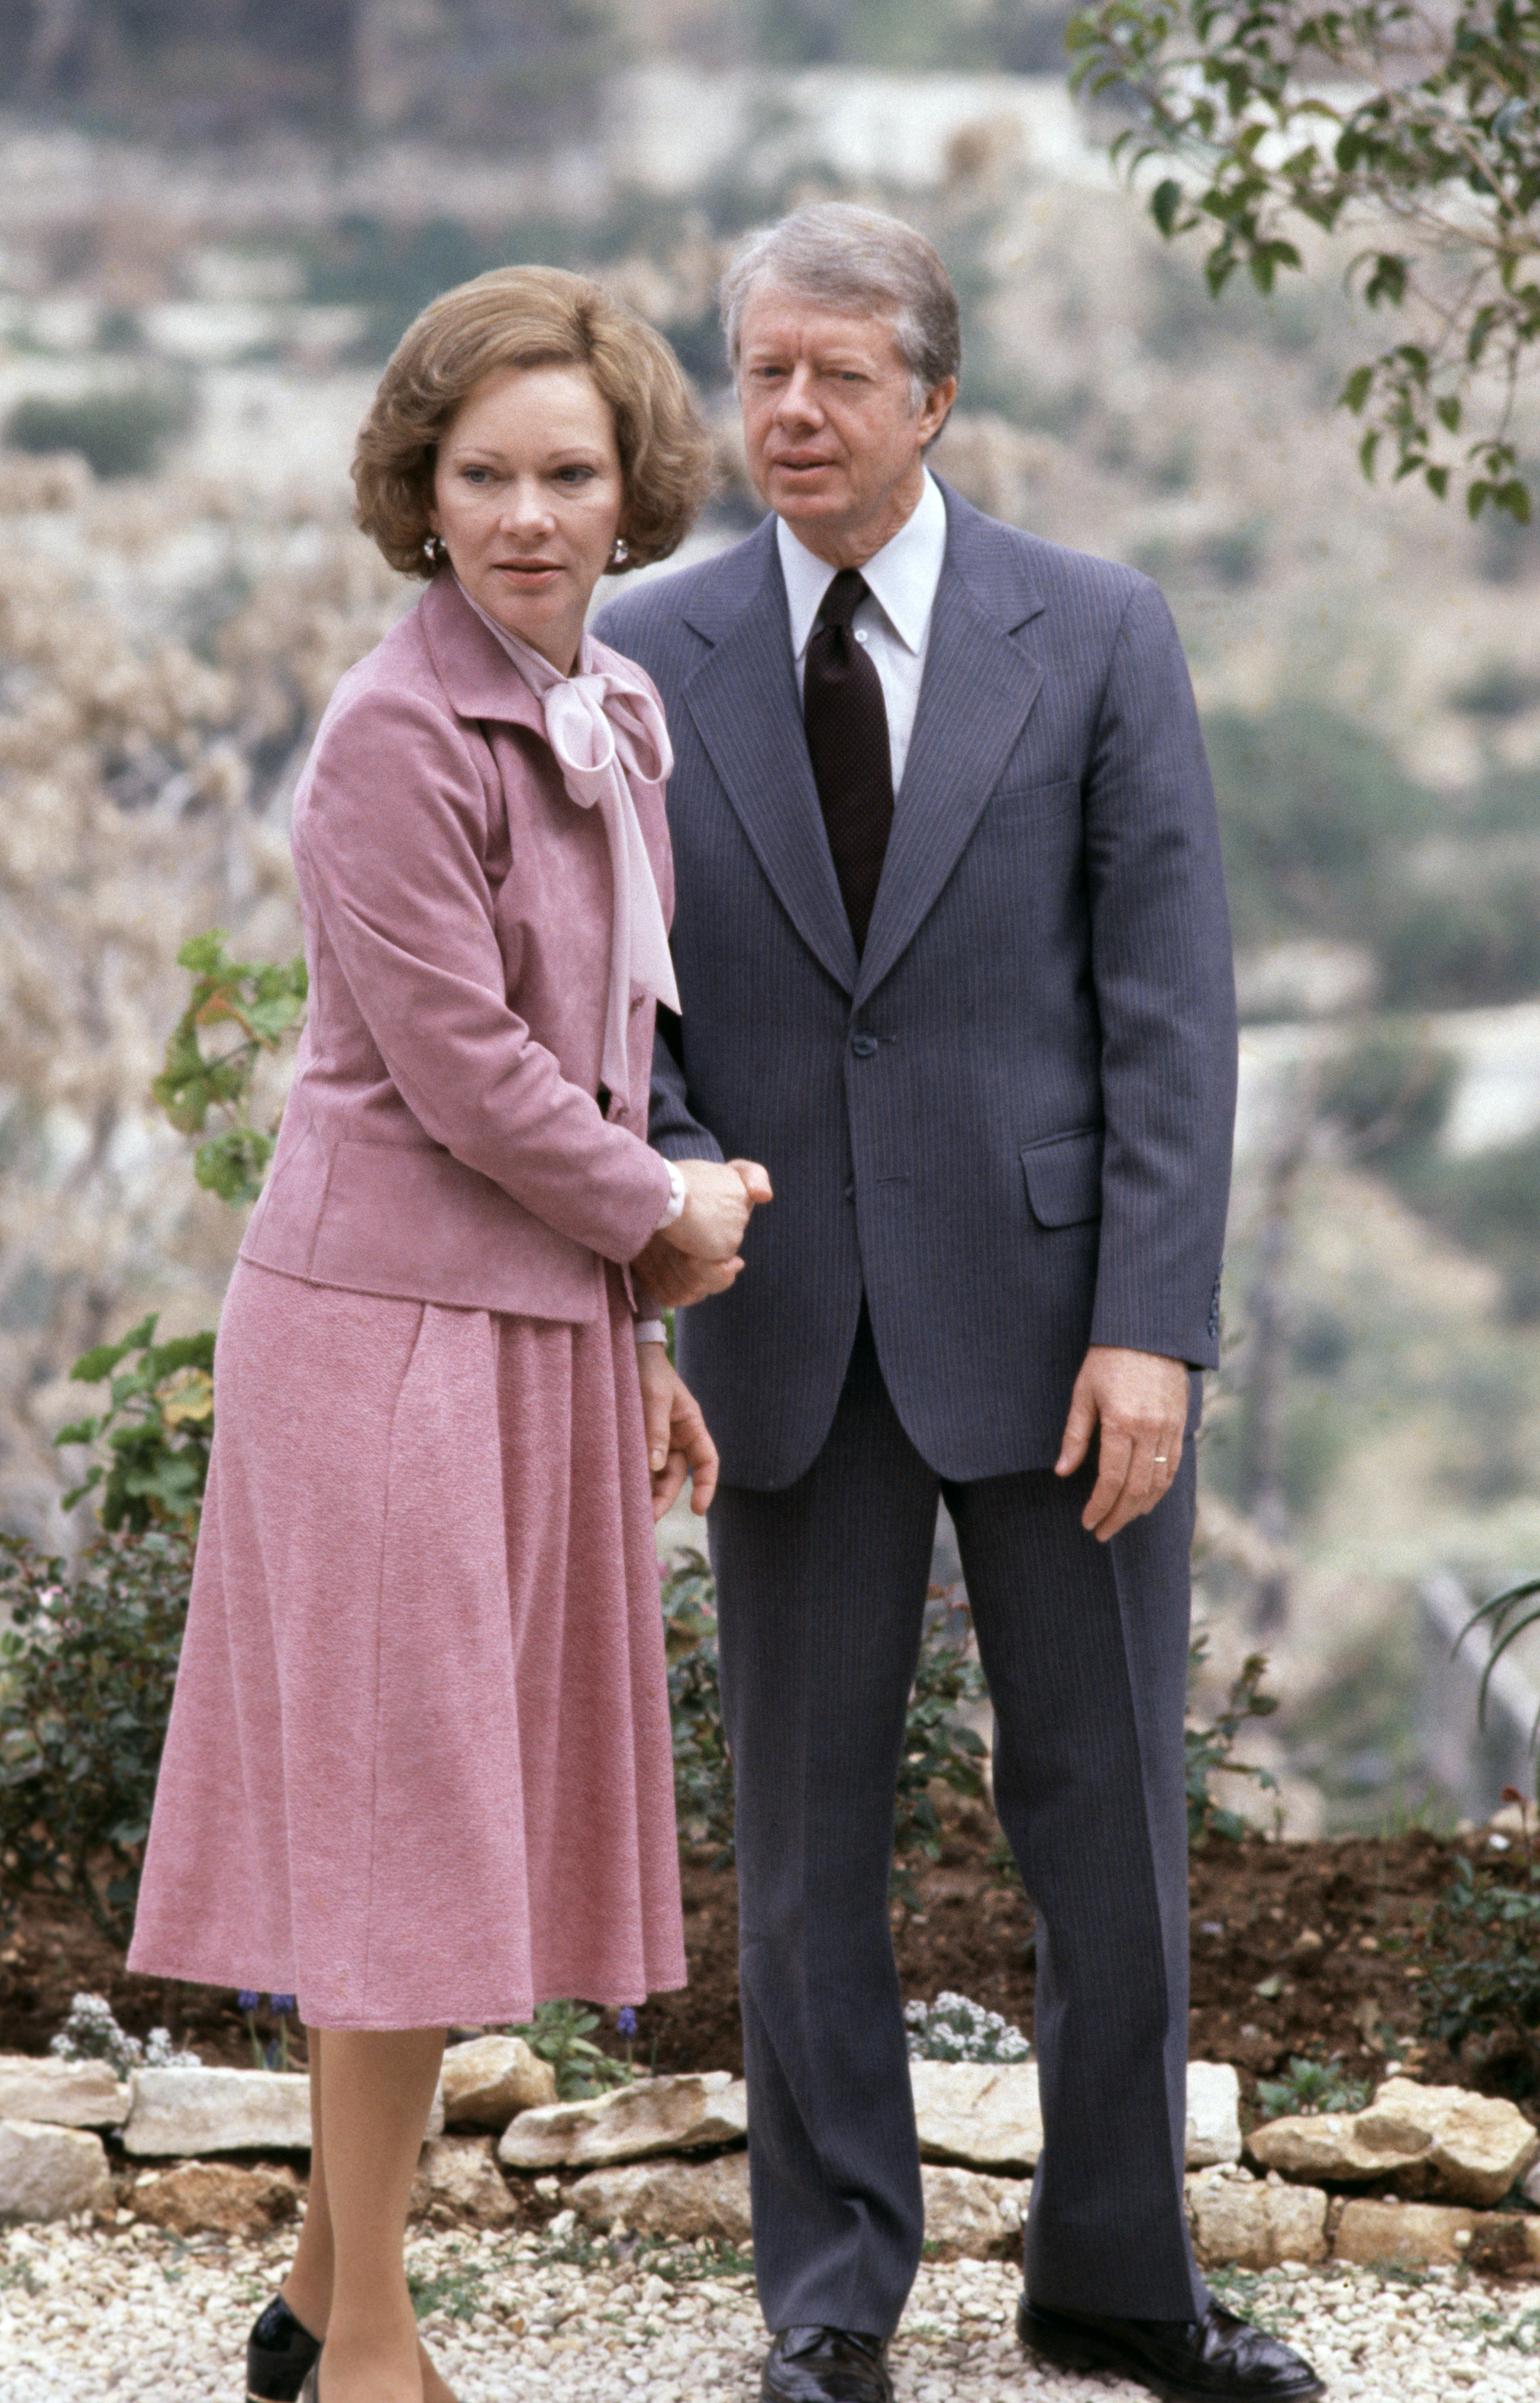 Rosalynn and Jimmy Carter in Jerusalem, Israel, in 1979 | Source: Getty Images